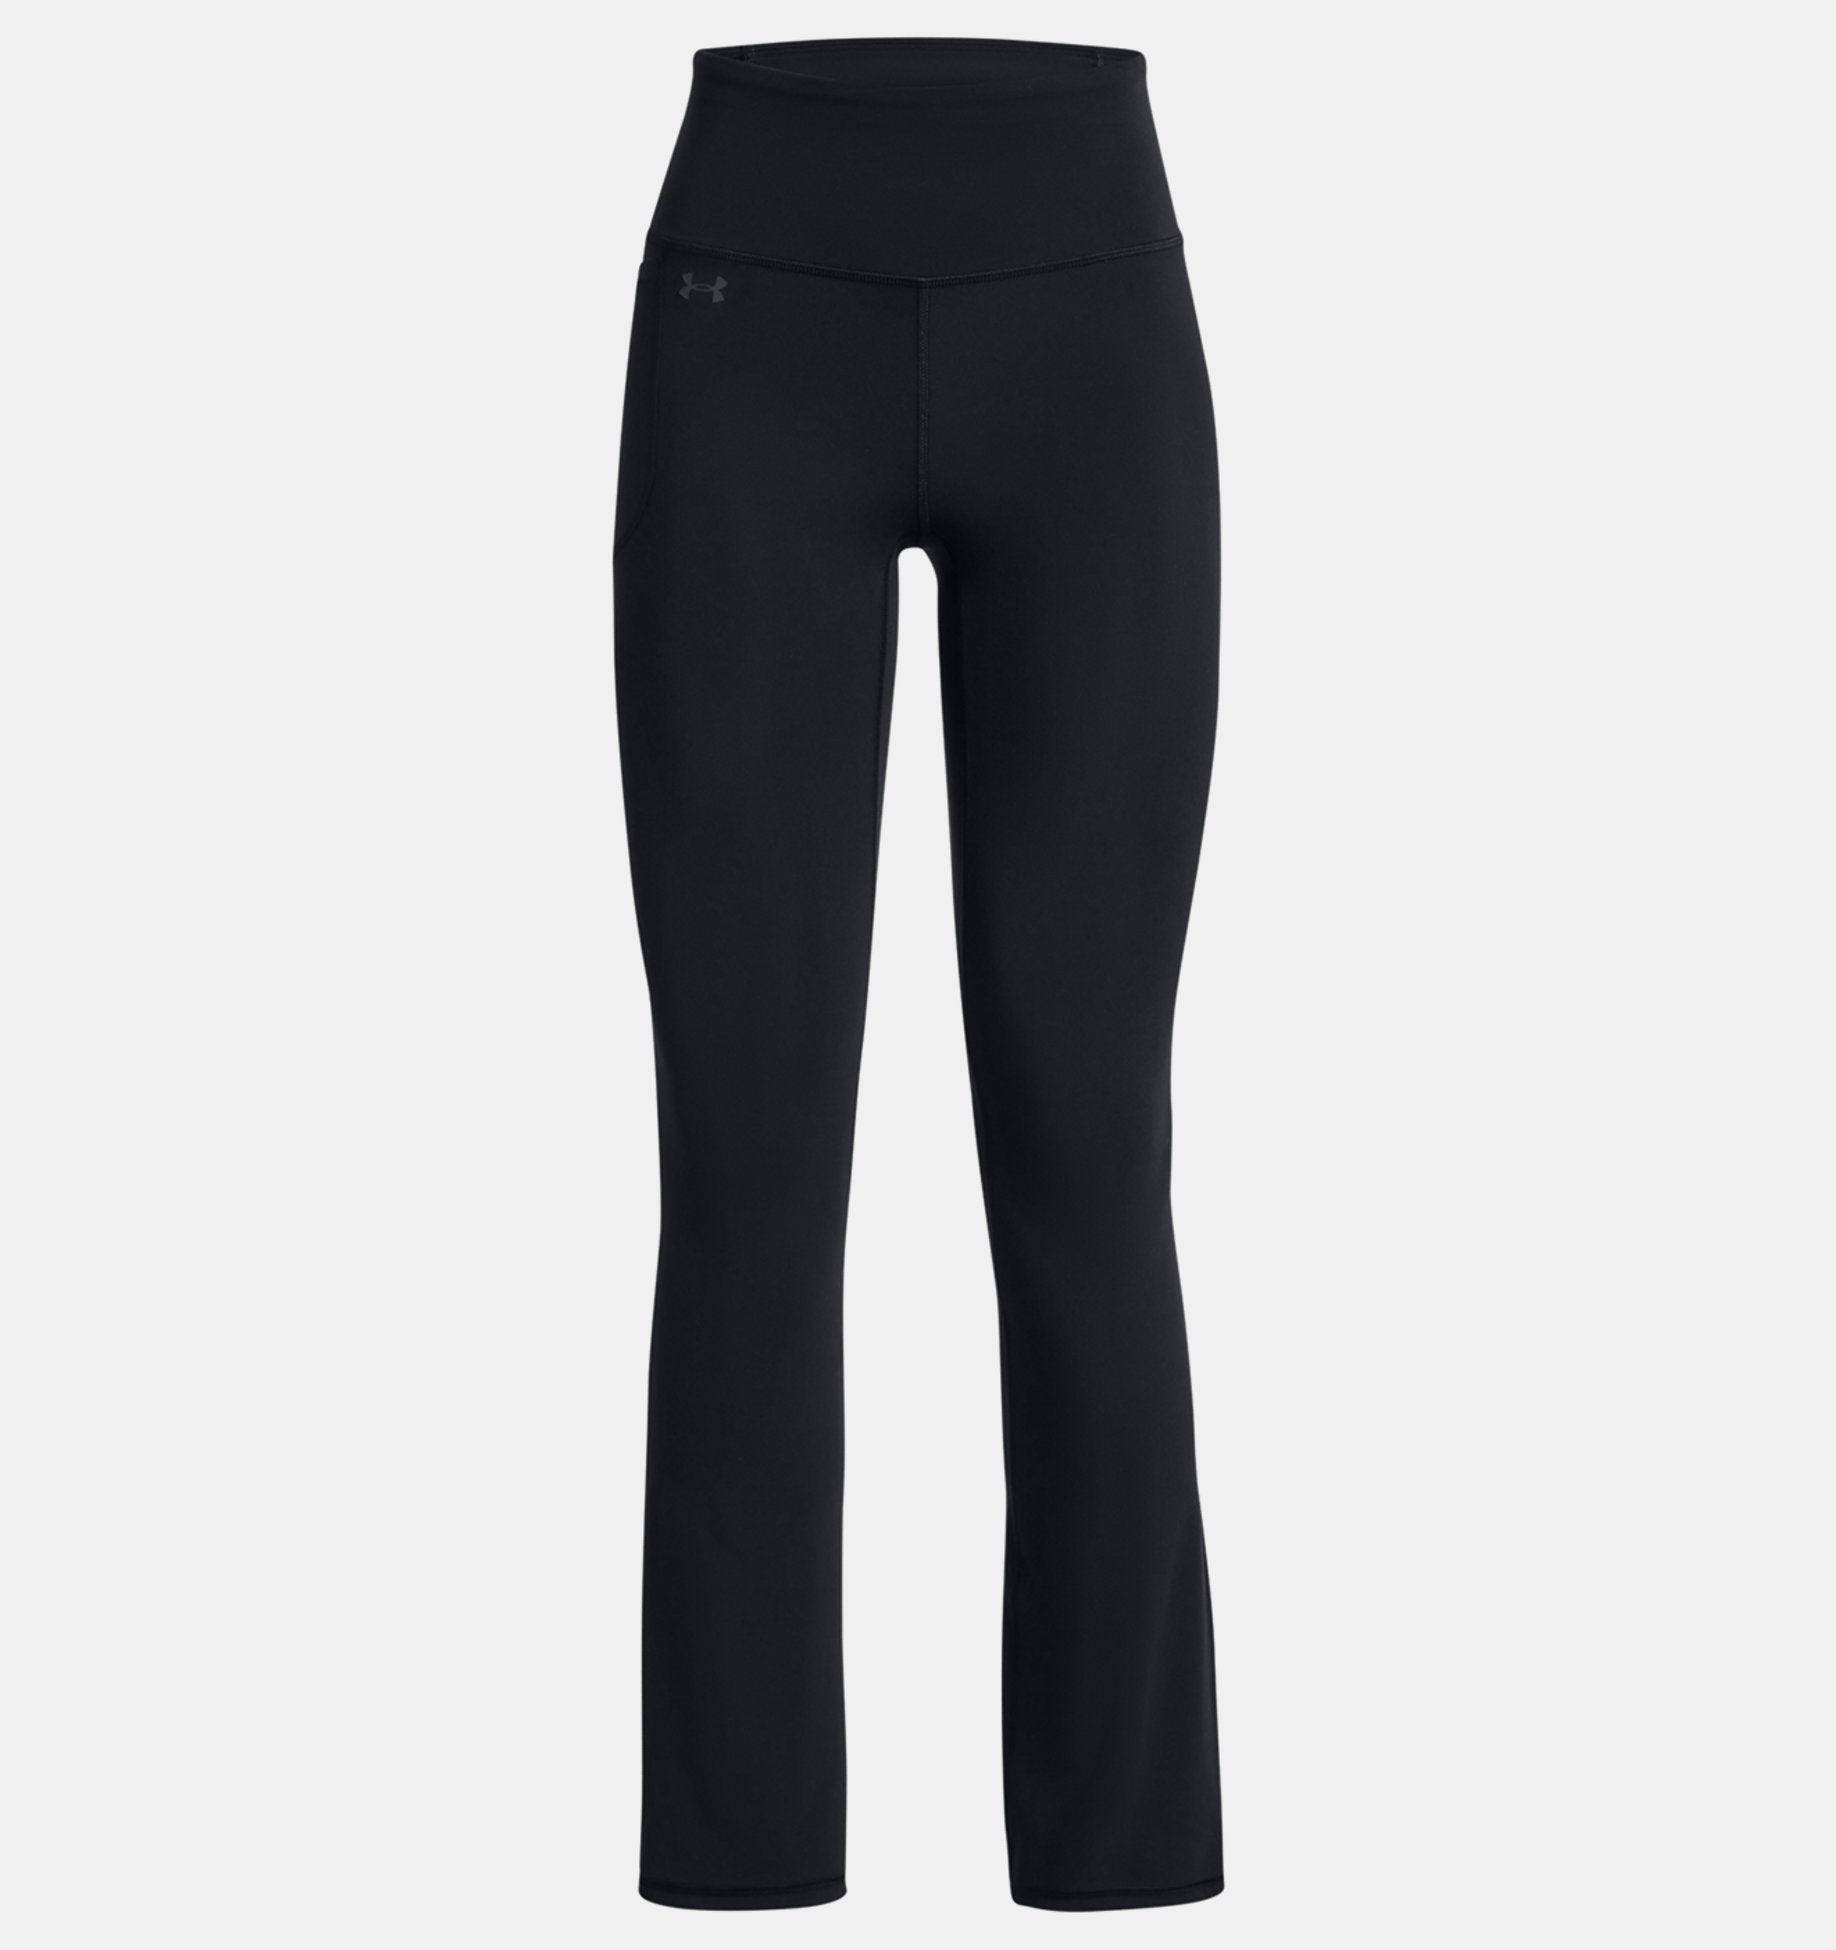 Women’s Motion Flare Pant - The Shoe Collectiveunder armour